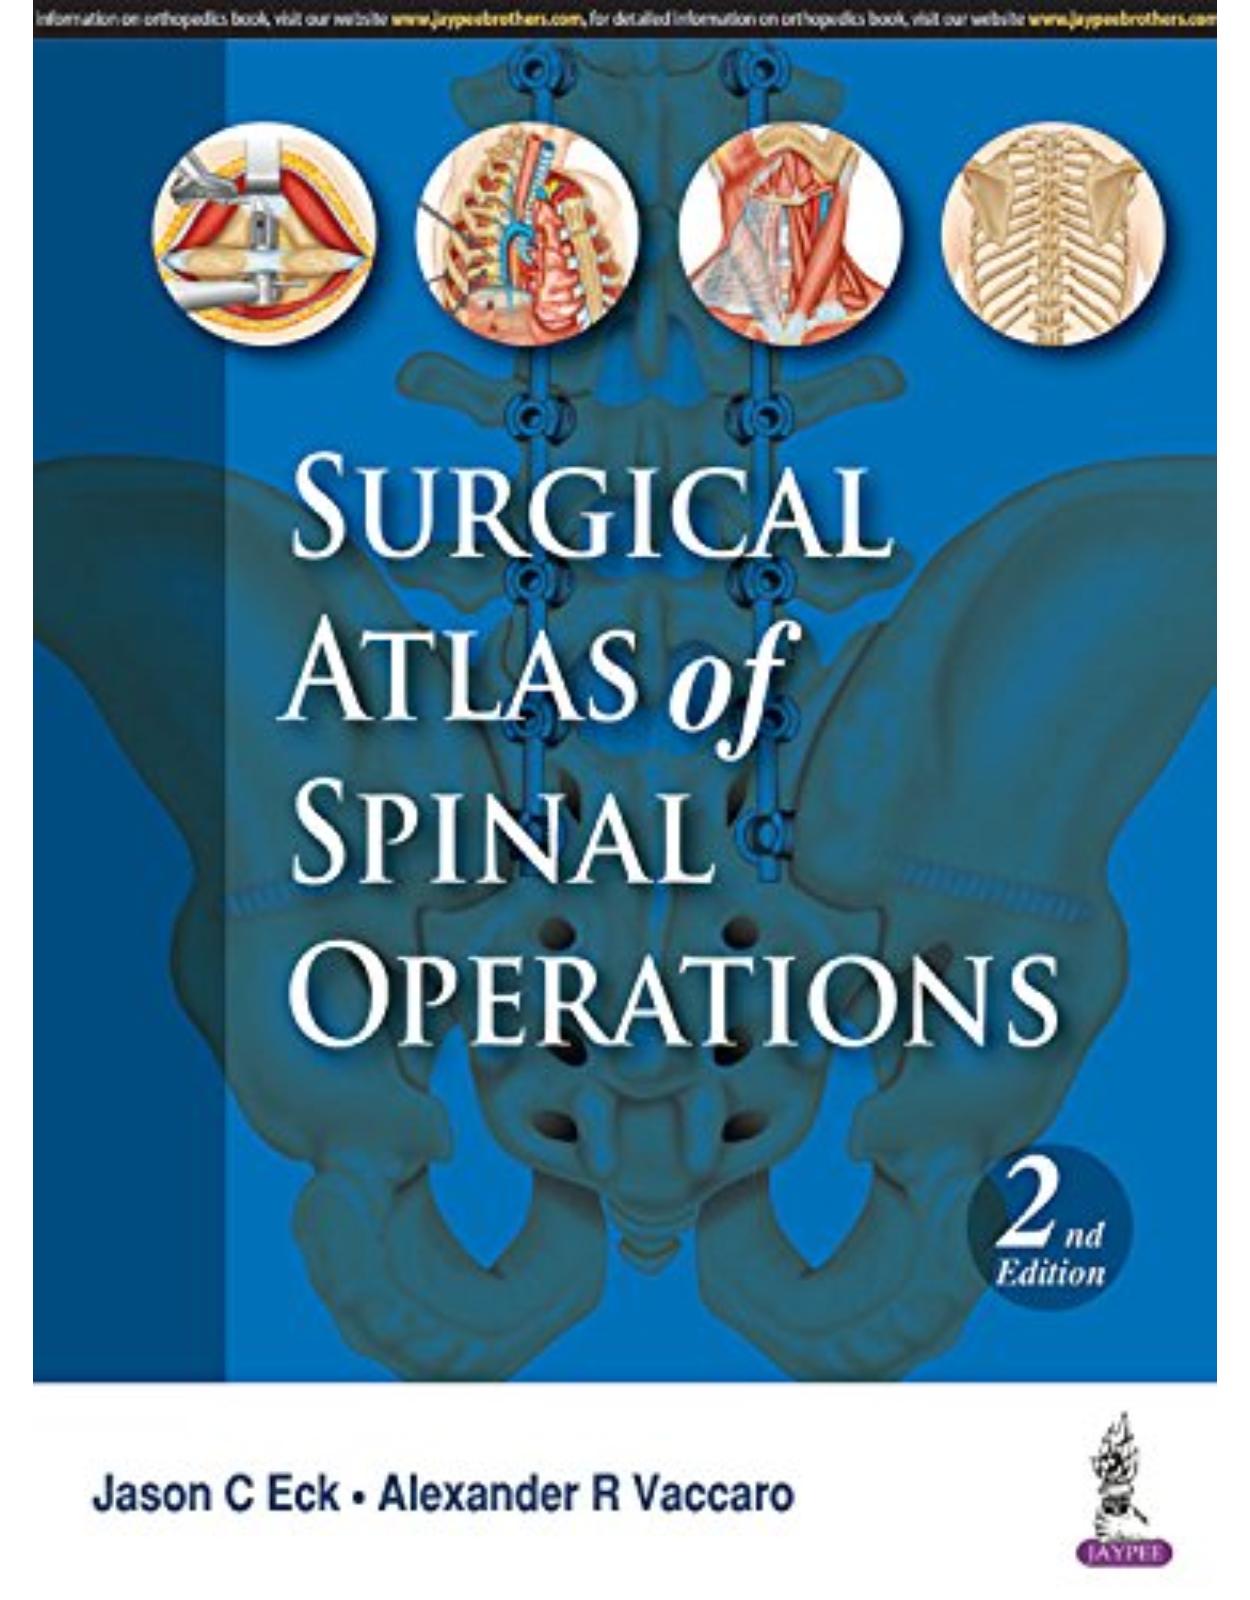 Surgical Atlas of Spinal Operations